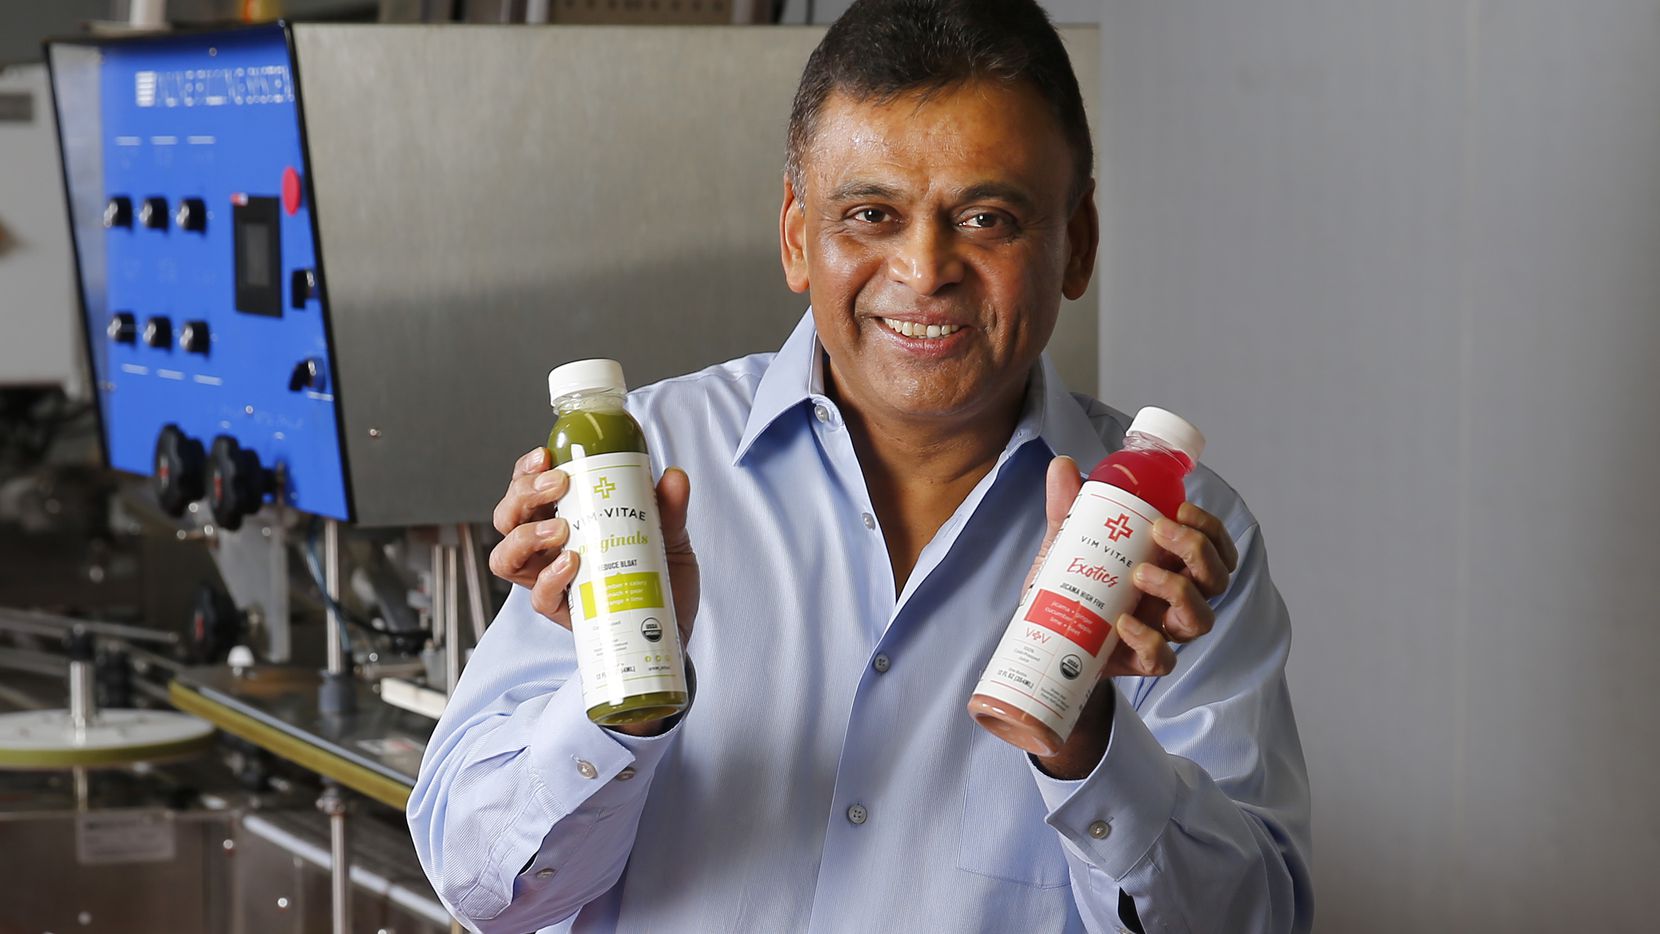 Vim Vitae CEO Nick Mysore poses with some of their natural, organic juices they produce at...